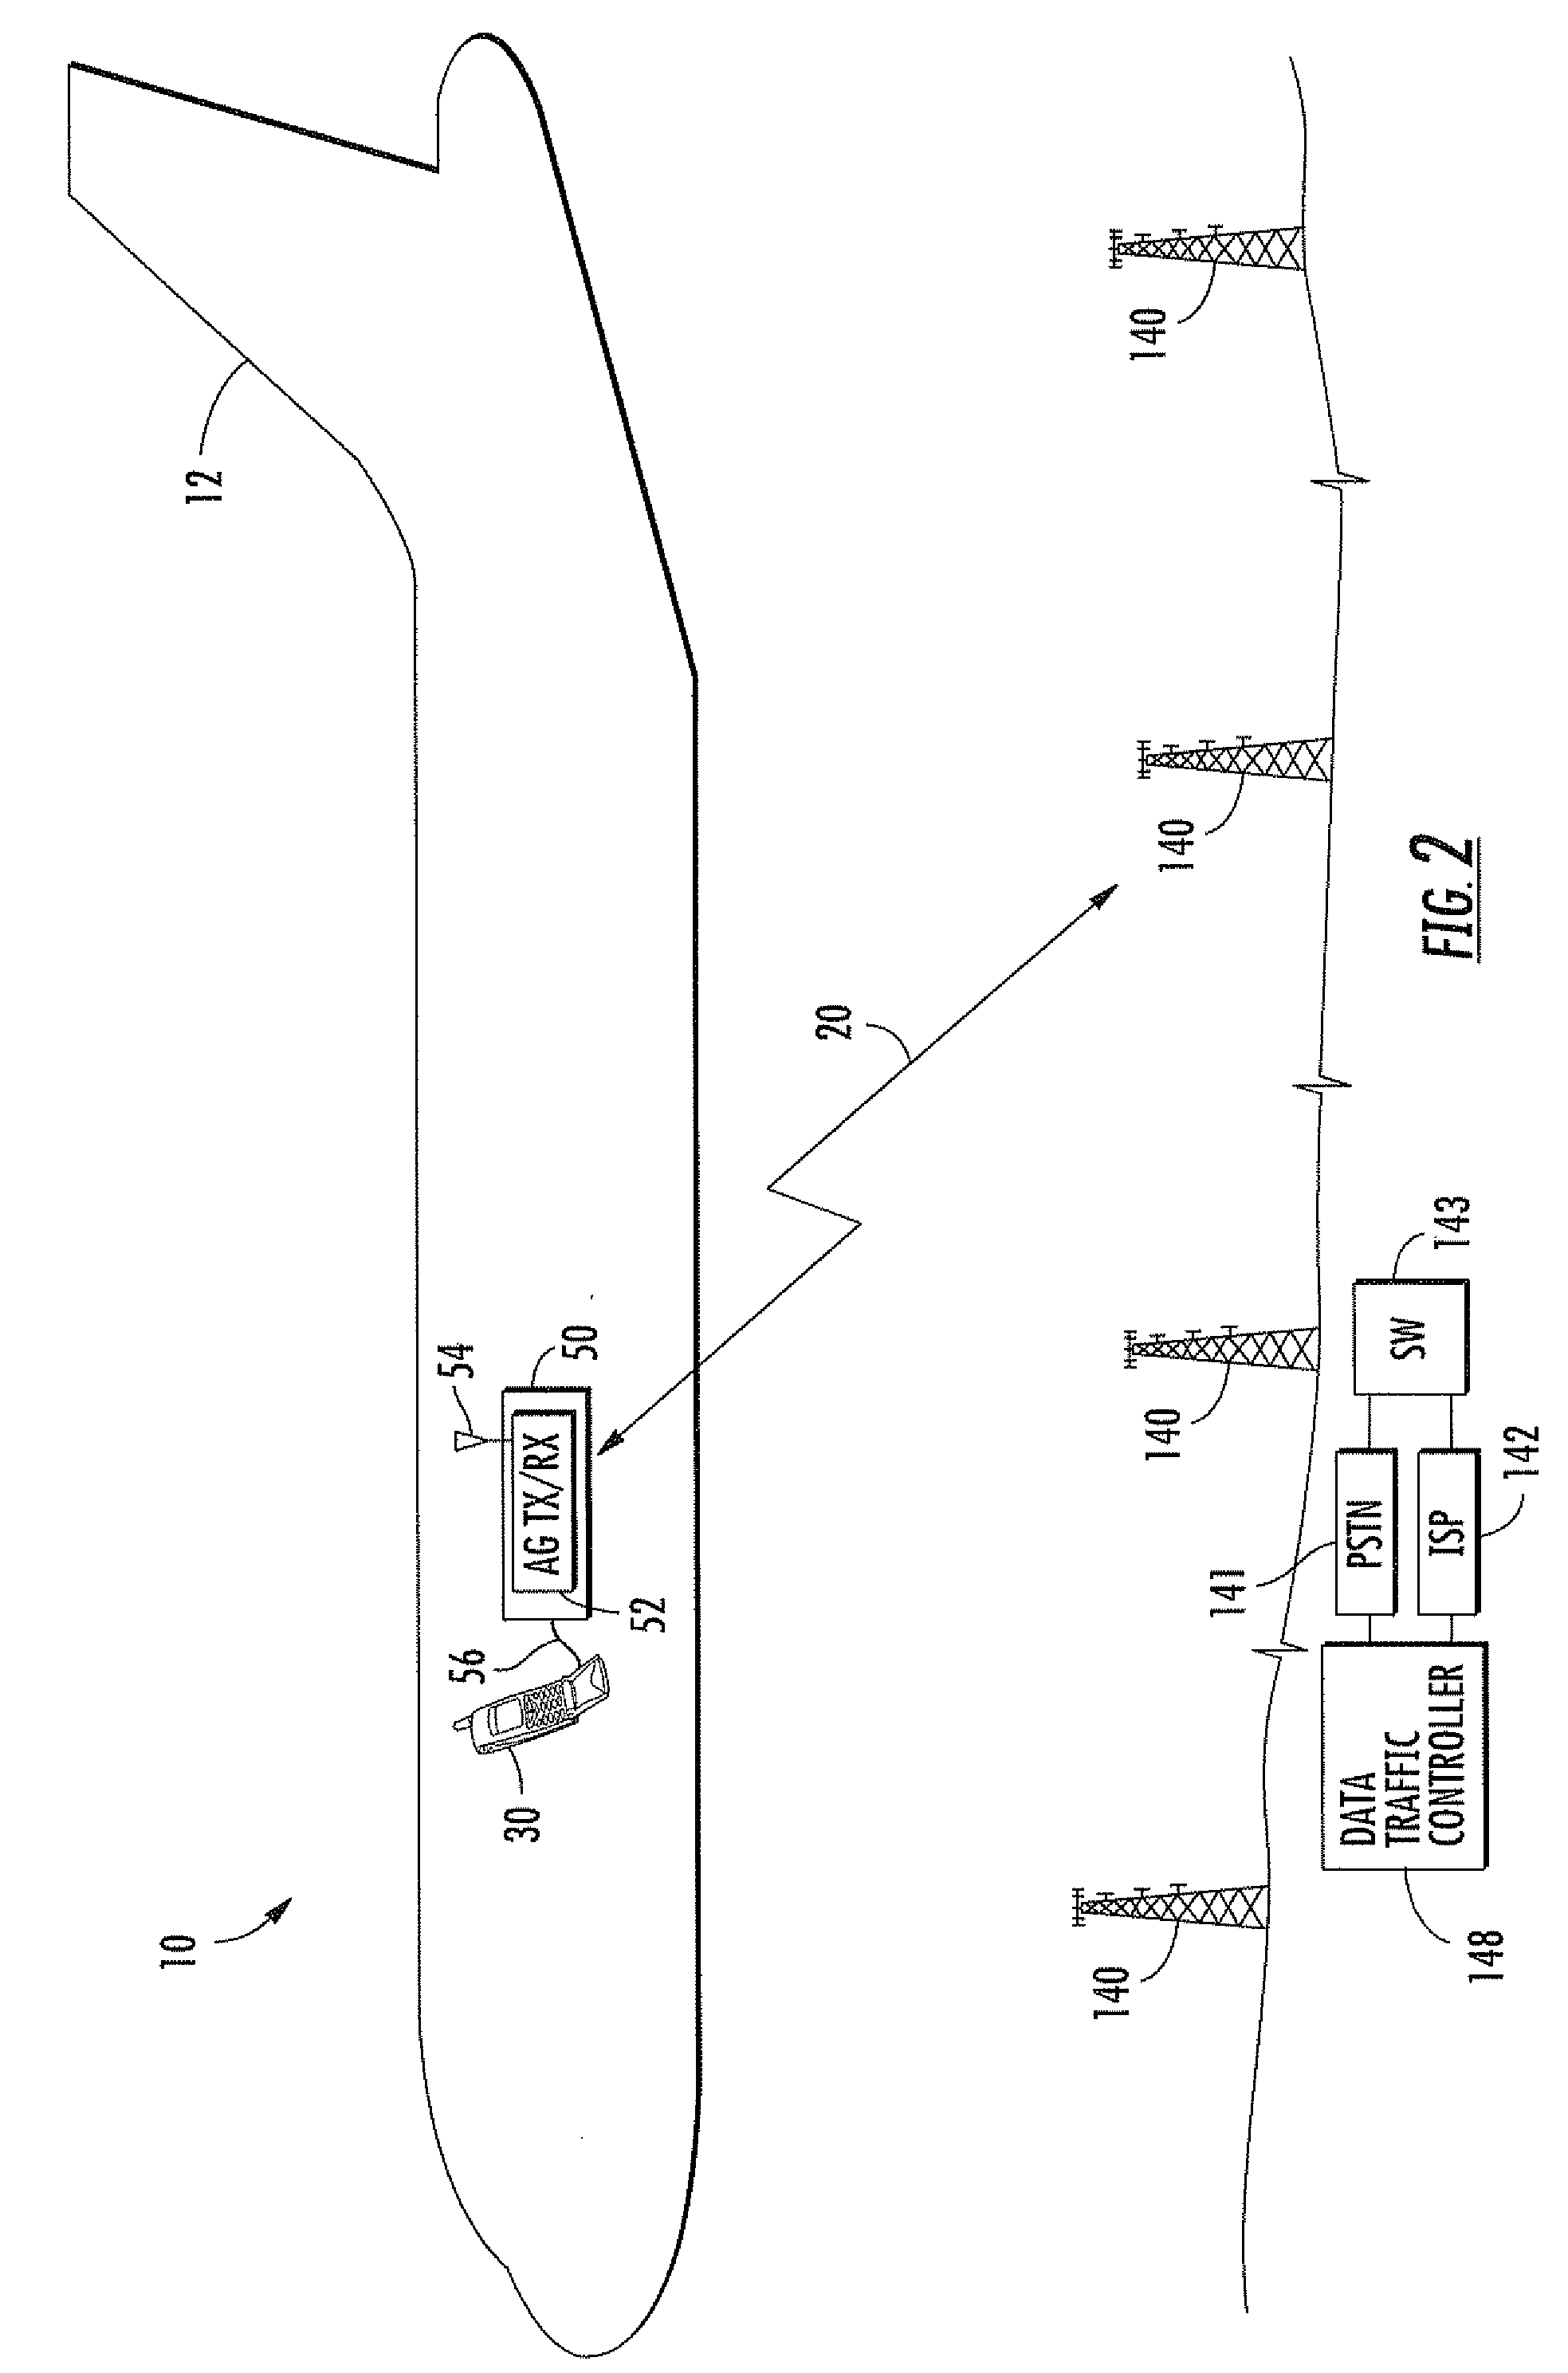 Aircraft in-flight entertainment system having a multi-beam phased array antenna and associated methods